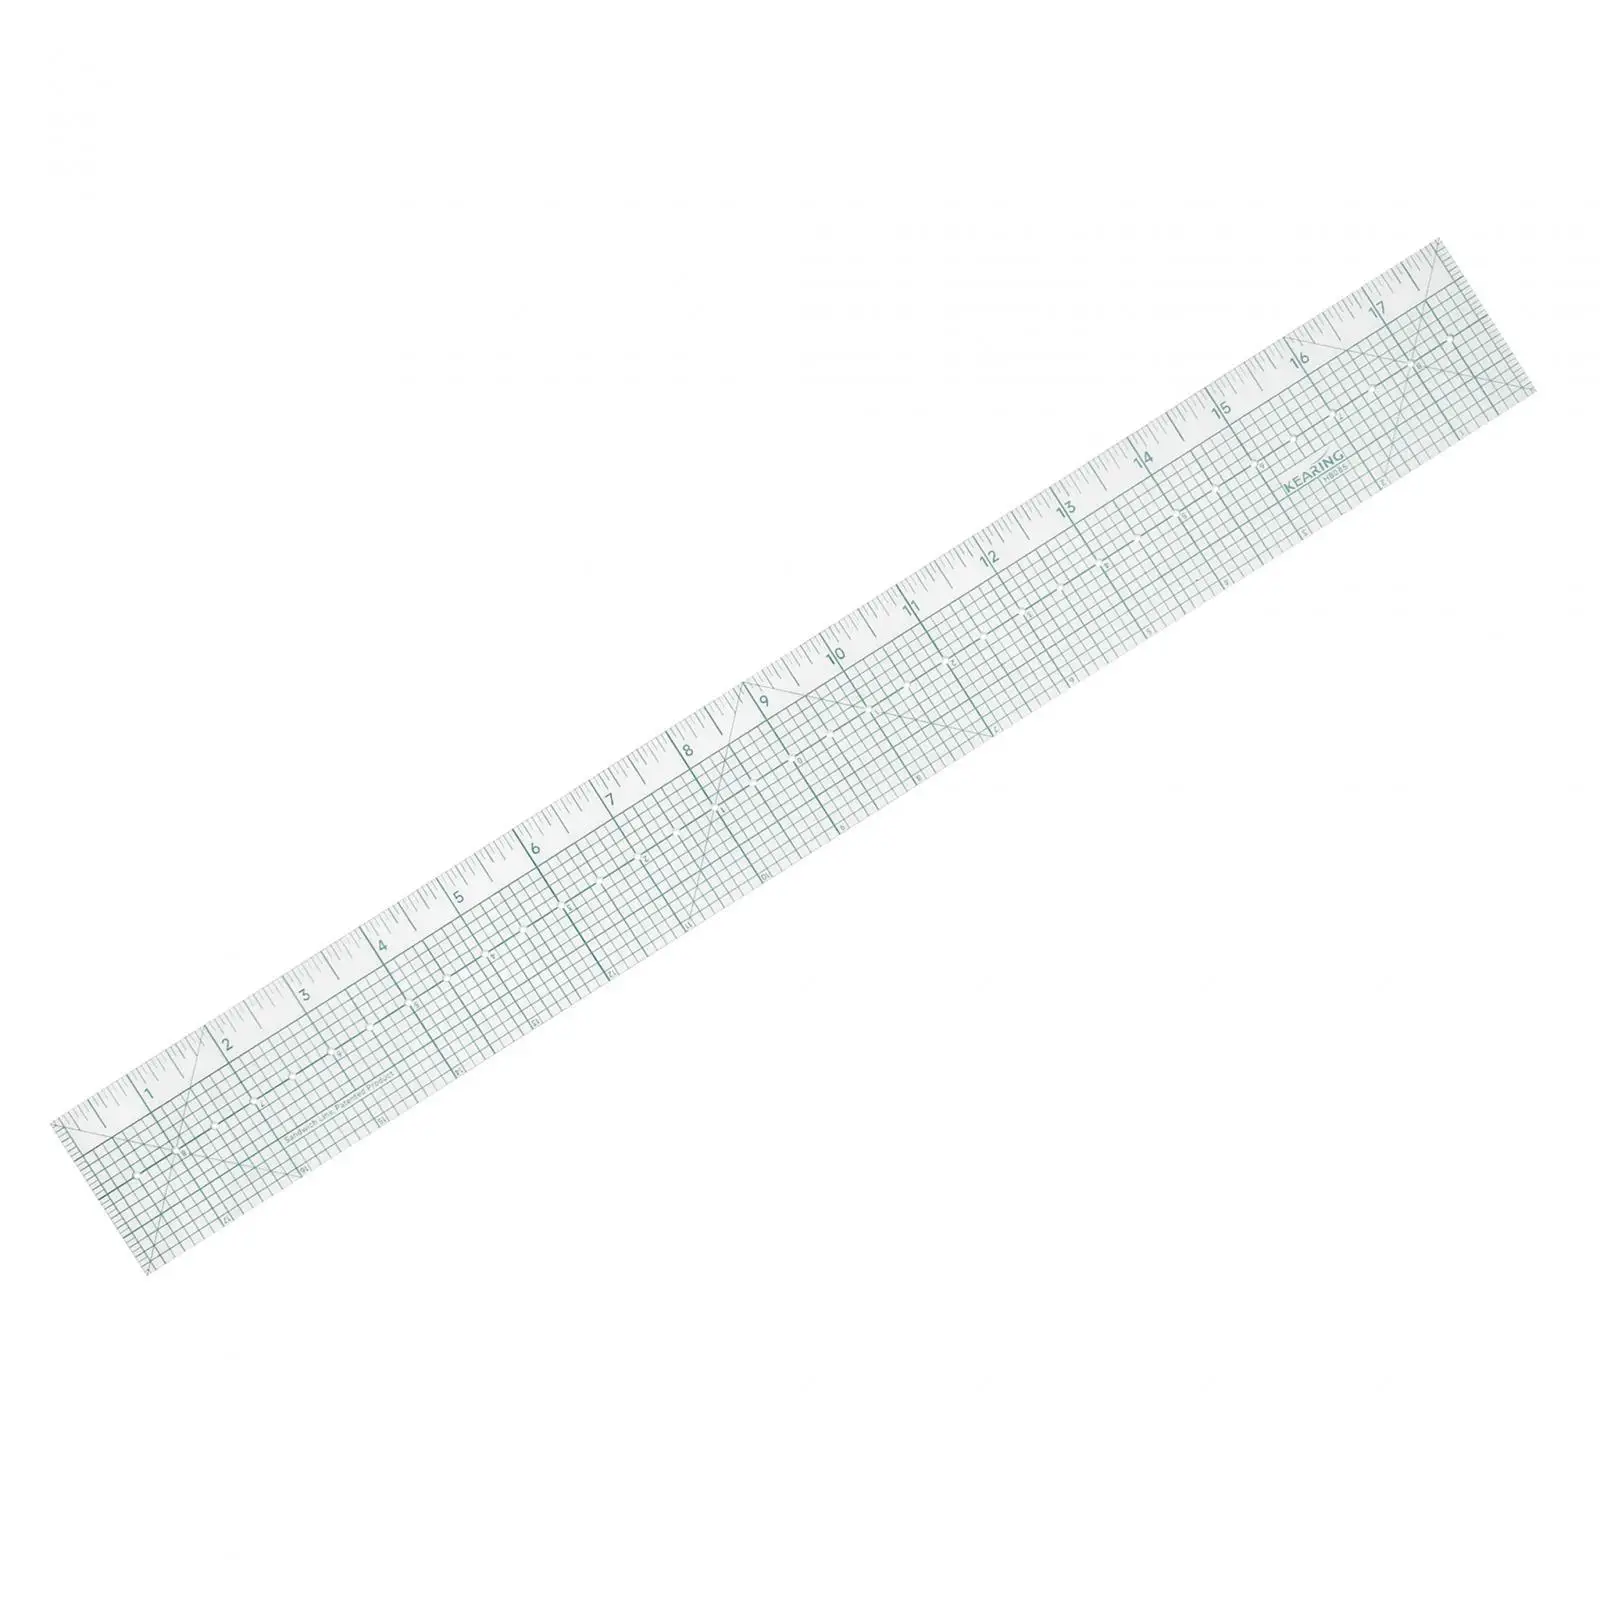 Sewing Cutting Ruler Easy Reading Universal 18